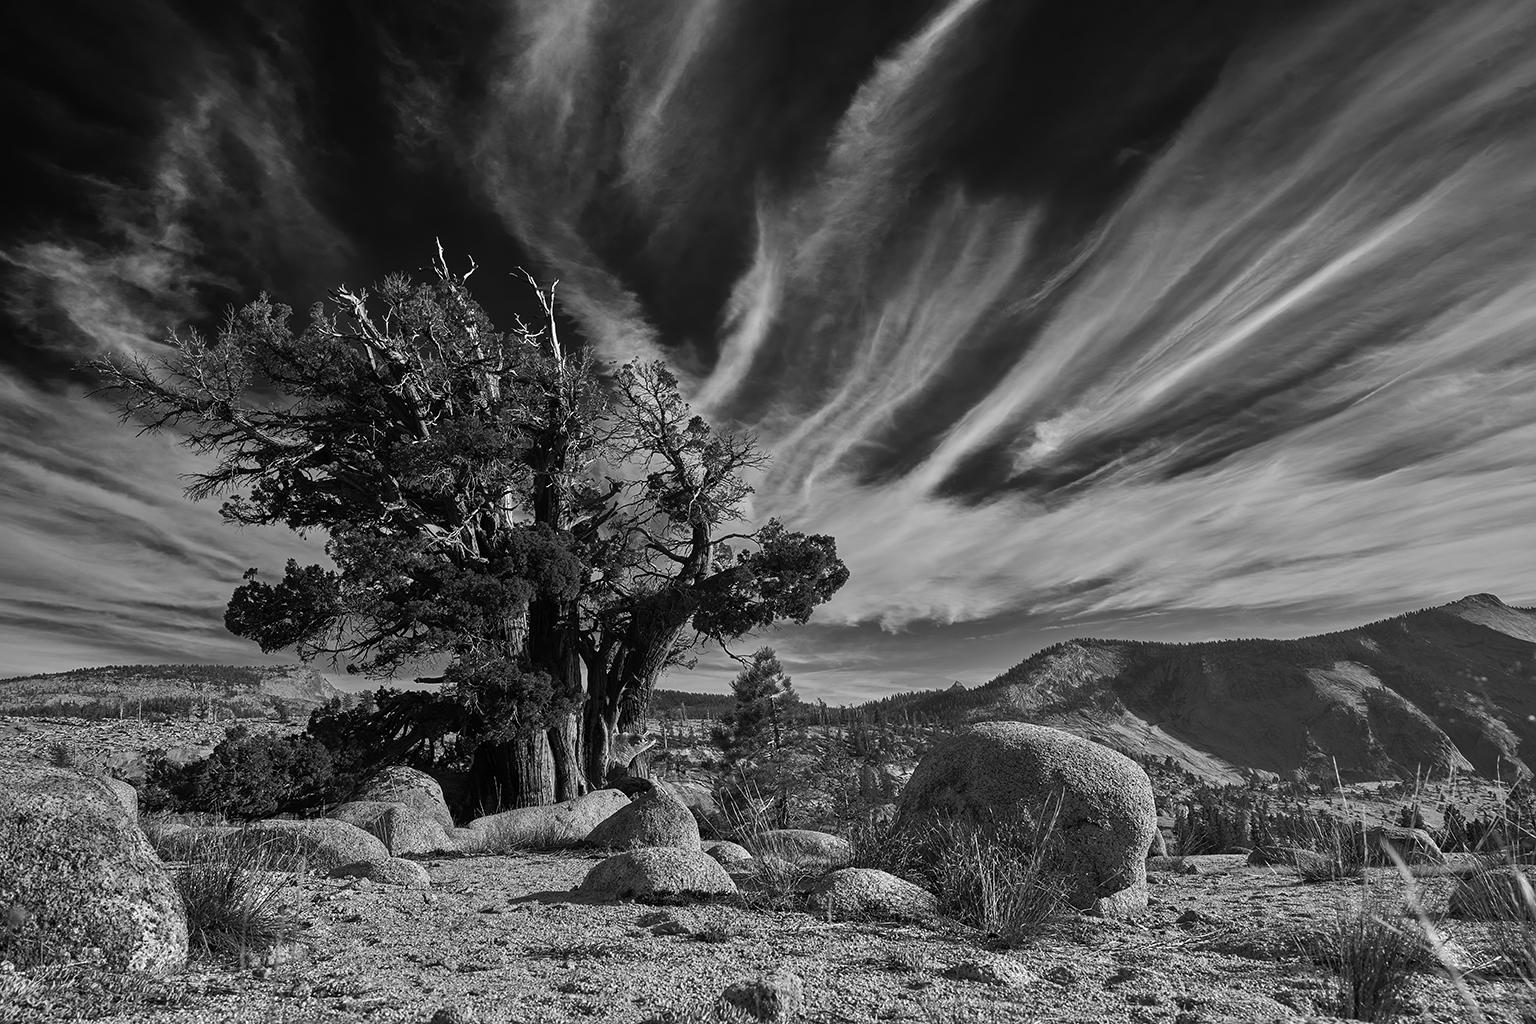 From a series of large scale black & white photographs capturing the ancient flora and dramatic arboretum of California's vast Sierra Nevada mountain landscapes, an homage to photography pioneer and nature preservationist Ansel Adams

48 x 72 inches